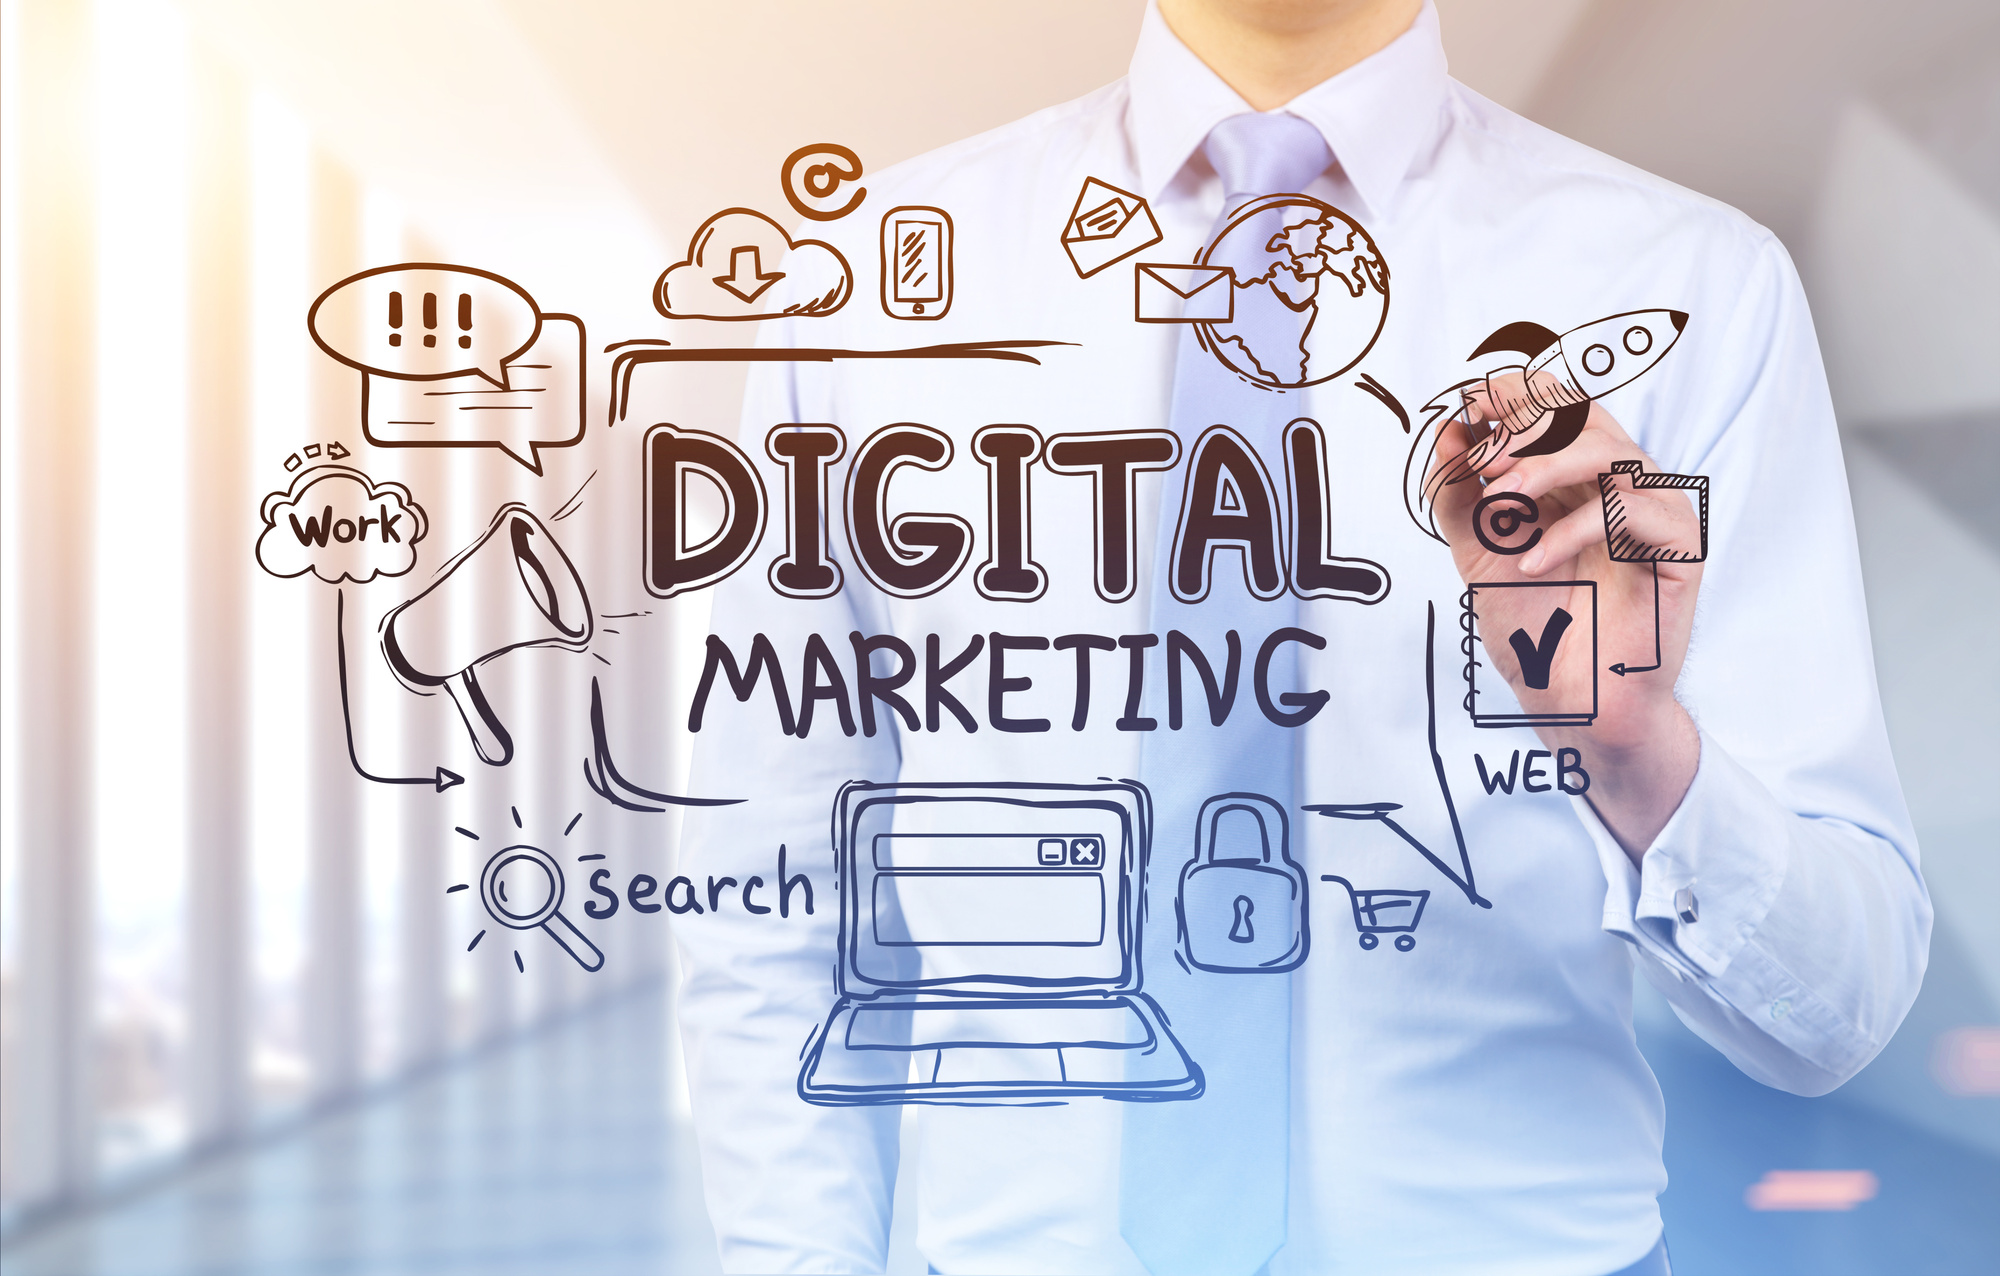 3-Ways-to-Stand-Out-with-Your-Next-Digital-Marketing-Campaign.jpeg